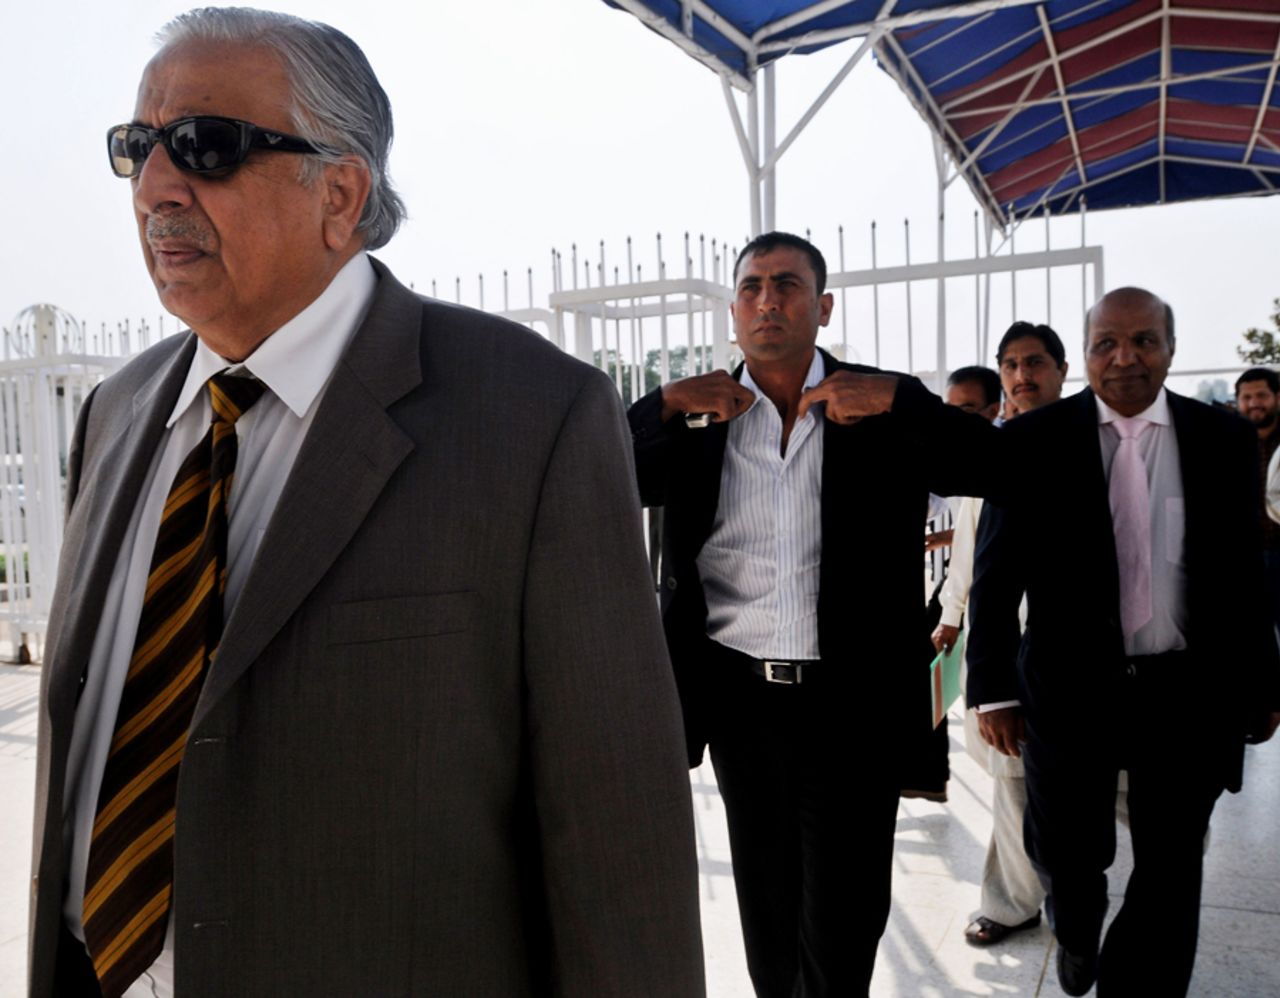 Younis Khan arrives, ready to resign as Pakistan captain, Islamabad, October 13, 2009 